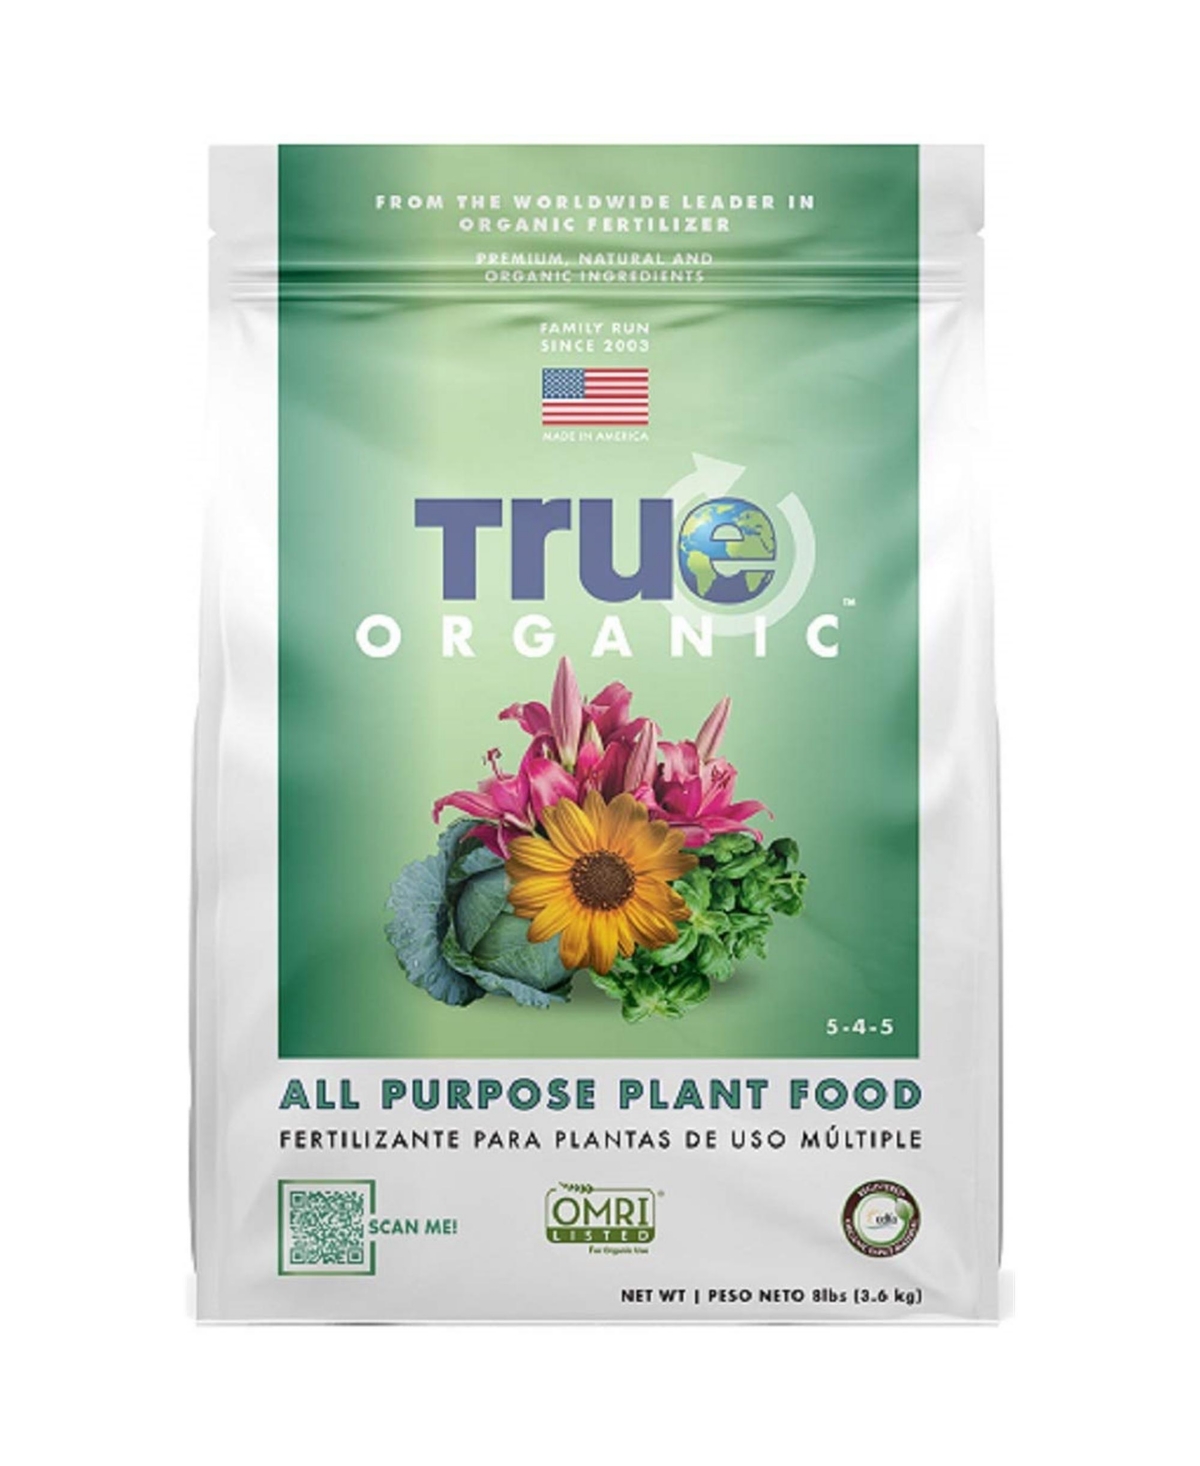 All-Purpose Plant Food for Organic Gardening, 8lb - Brown